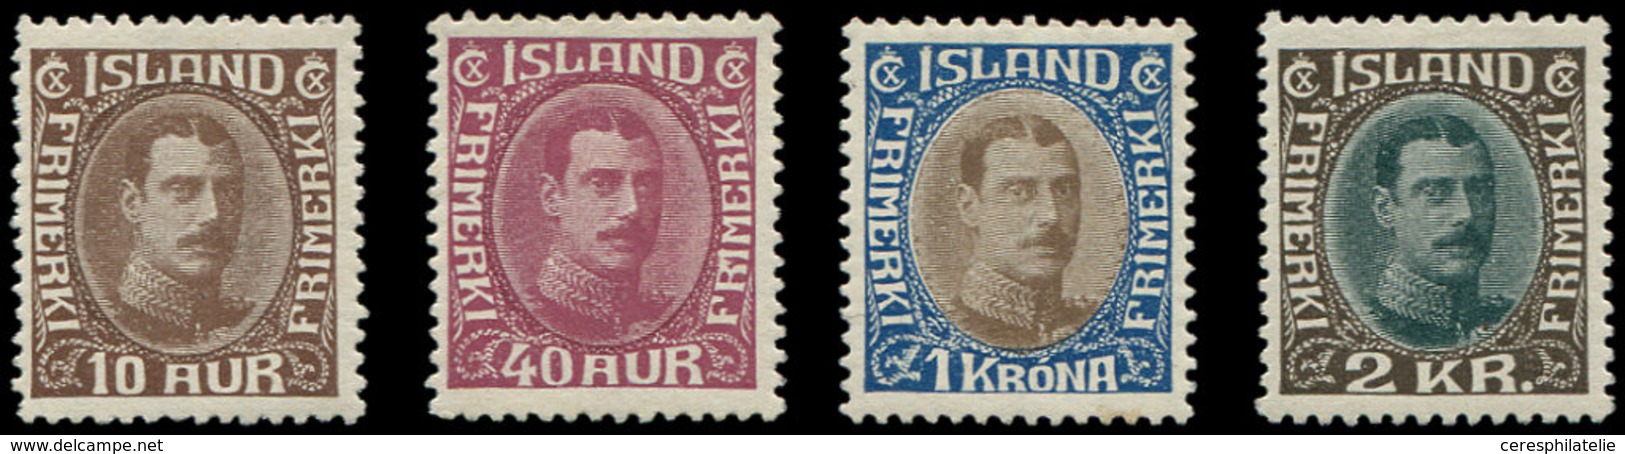 ** ISLANDE 148 Et 150/52 : Type Christian X, N°150 Infime Adh., Les Autres TB - Used Stamps